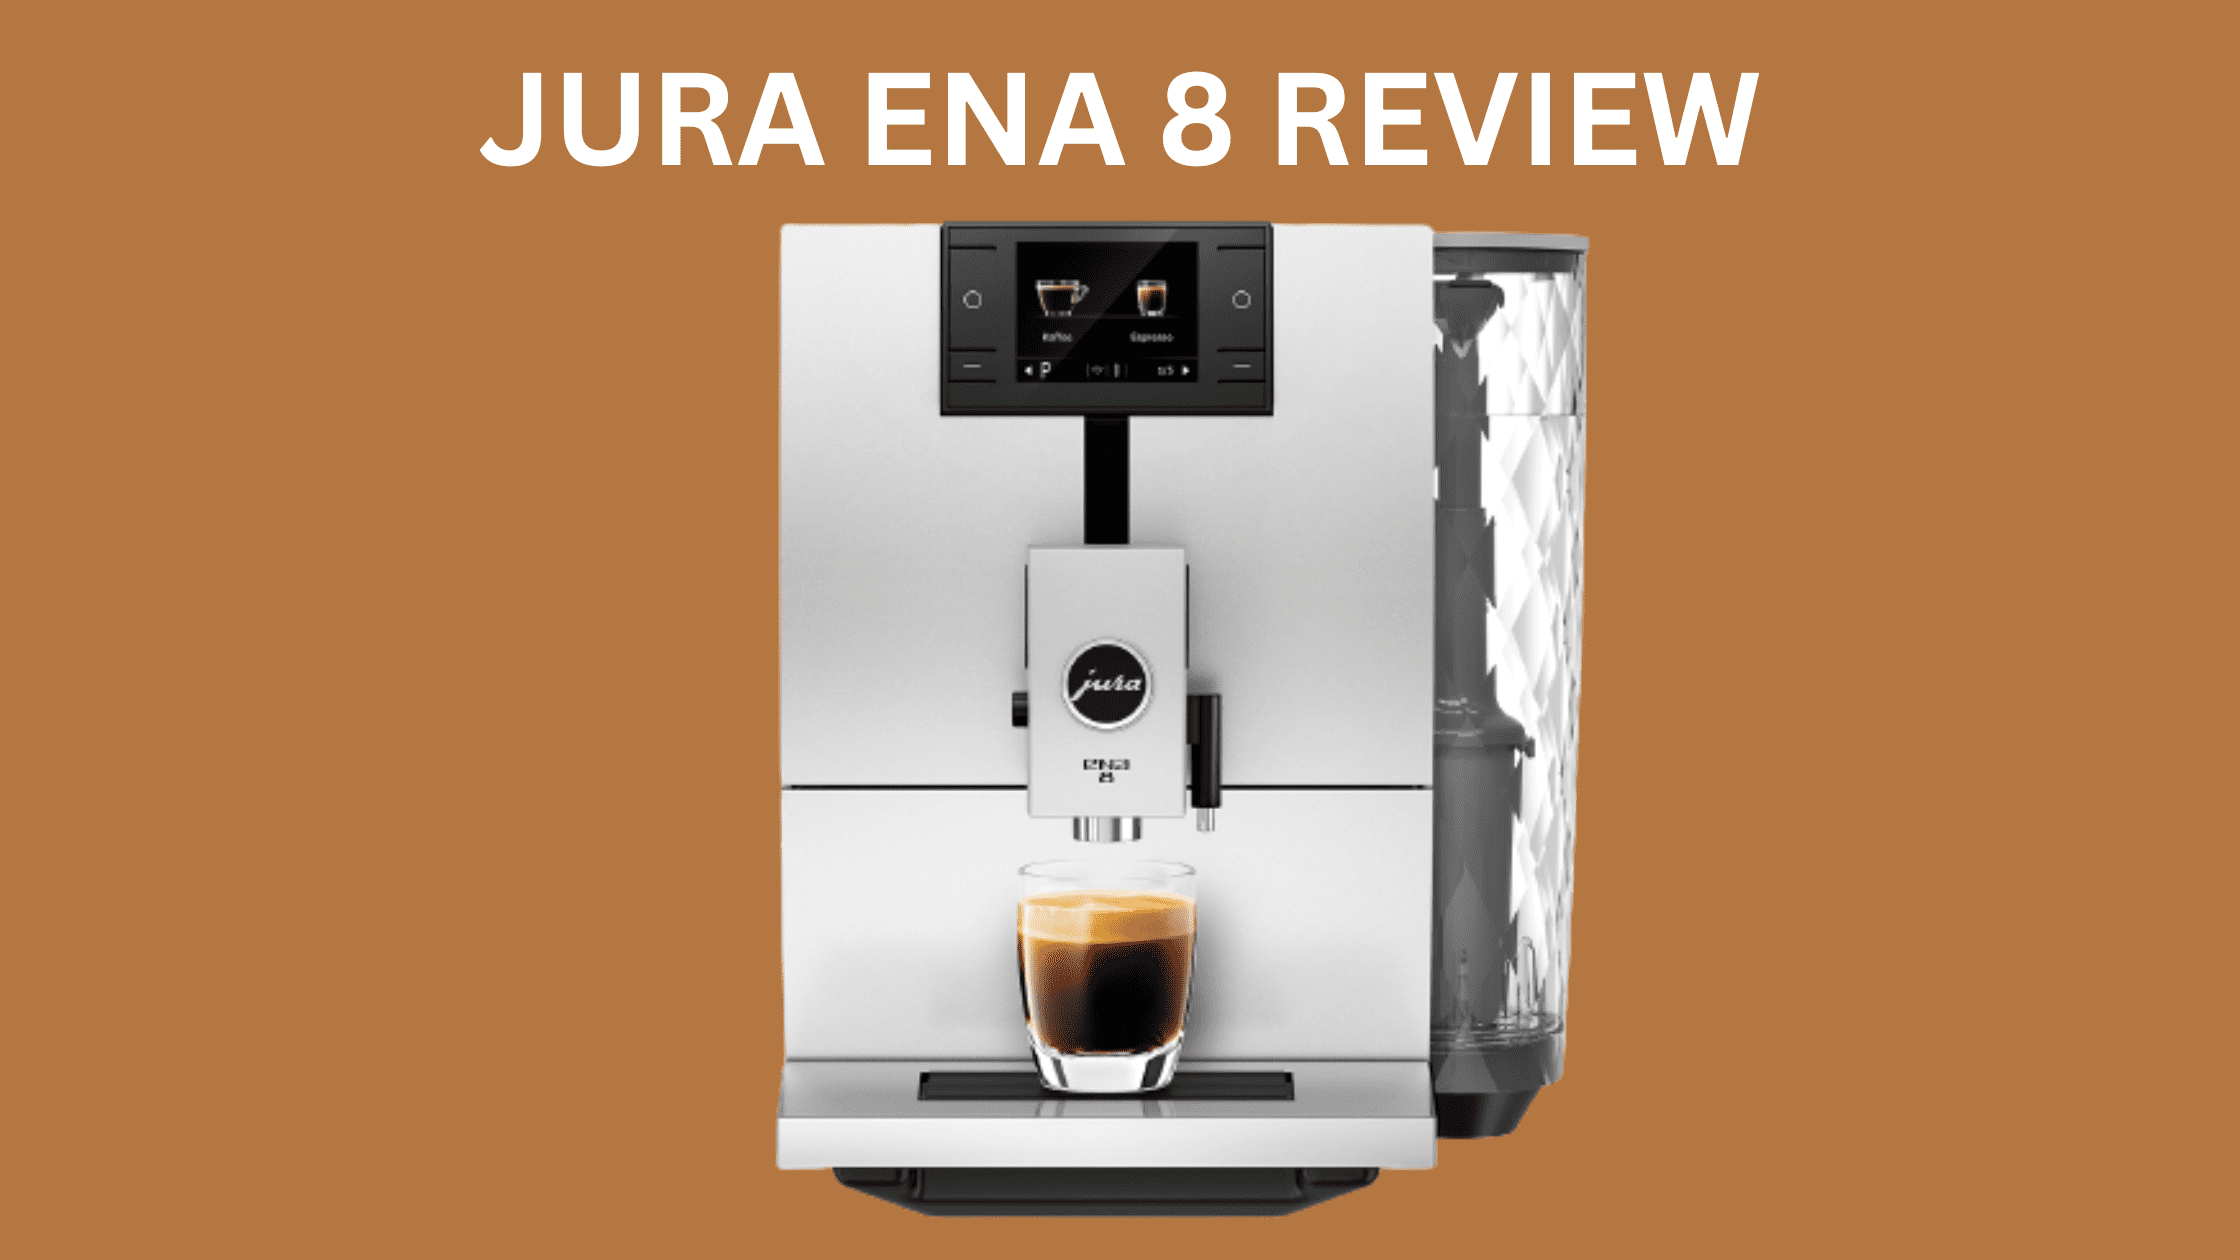 Jura ENA 8 Review: The Perfect Blend of Style and Functionality